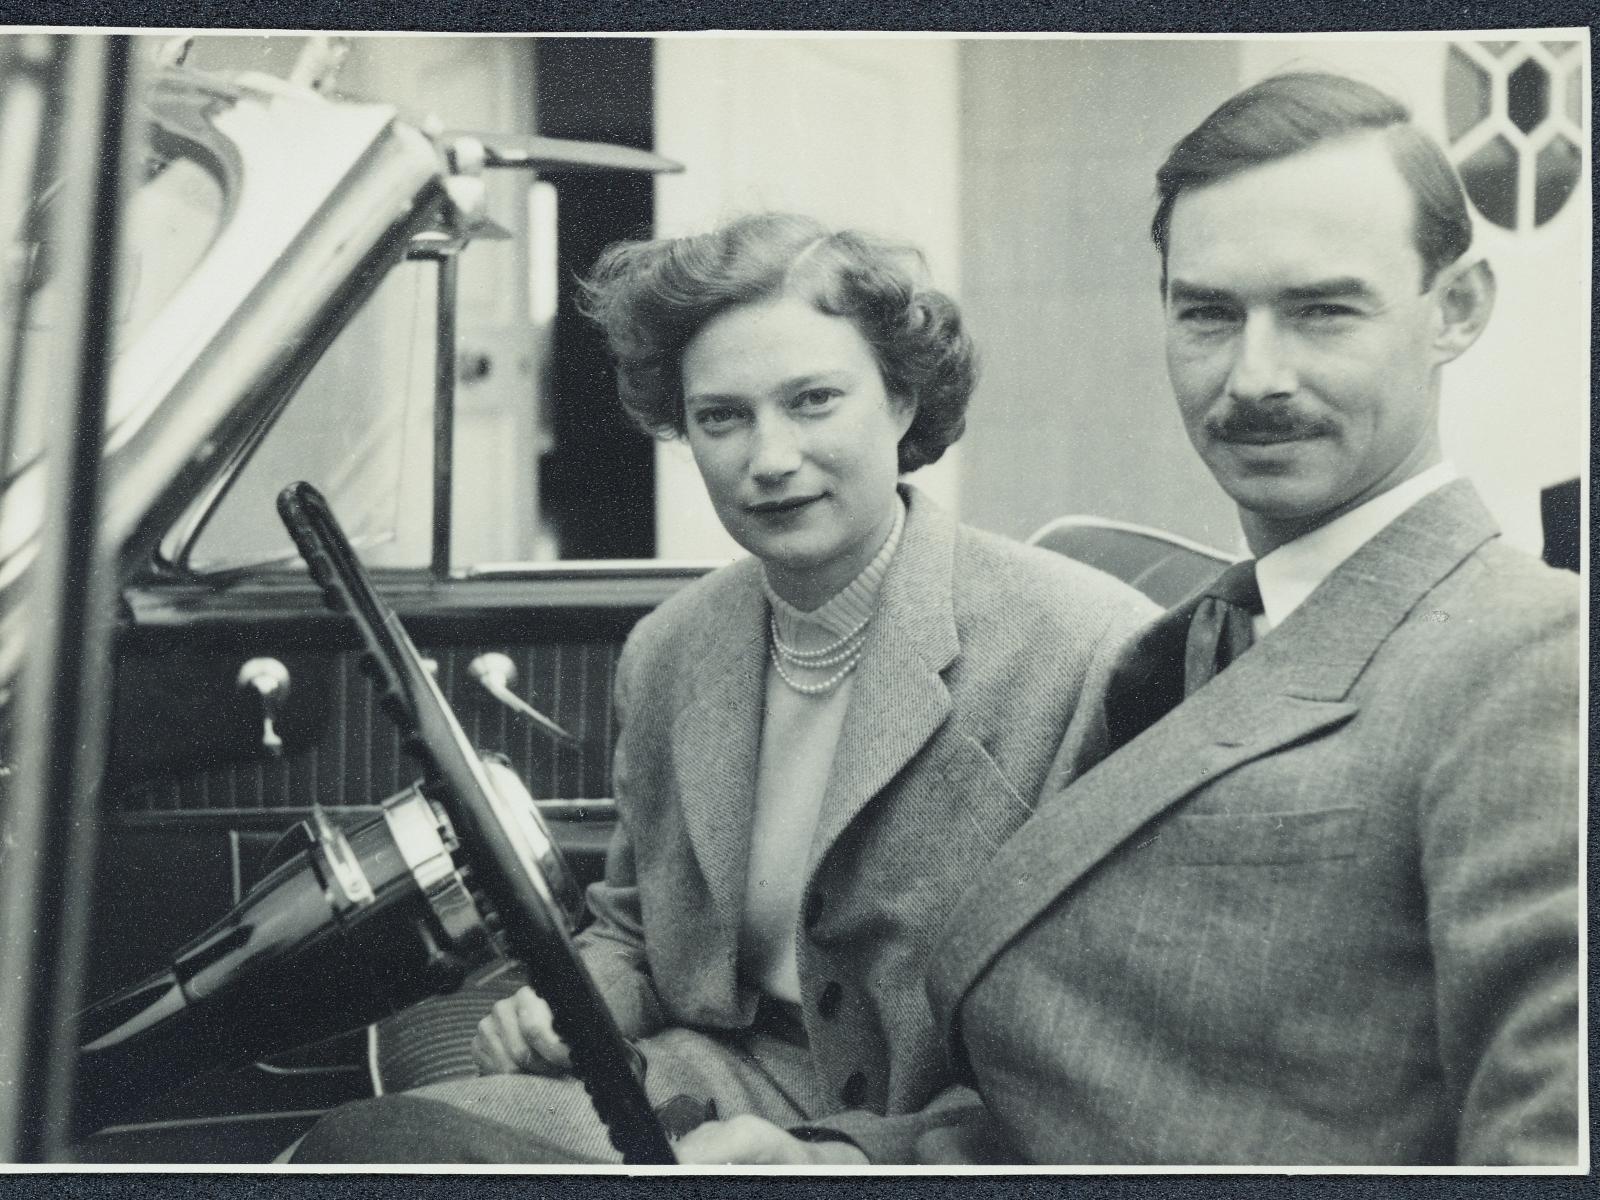 Prince Jean and Princess Joséphine-Charlotte in 1953